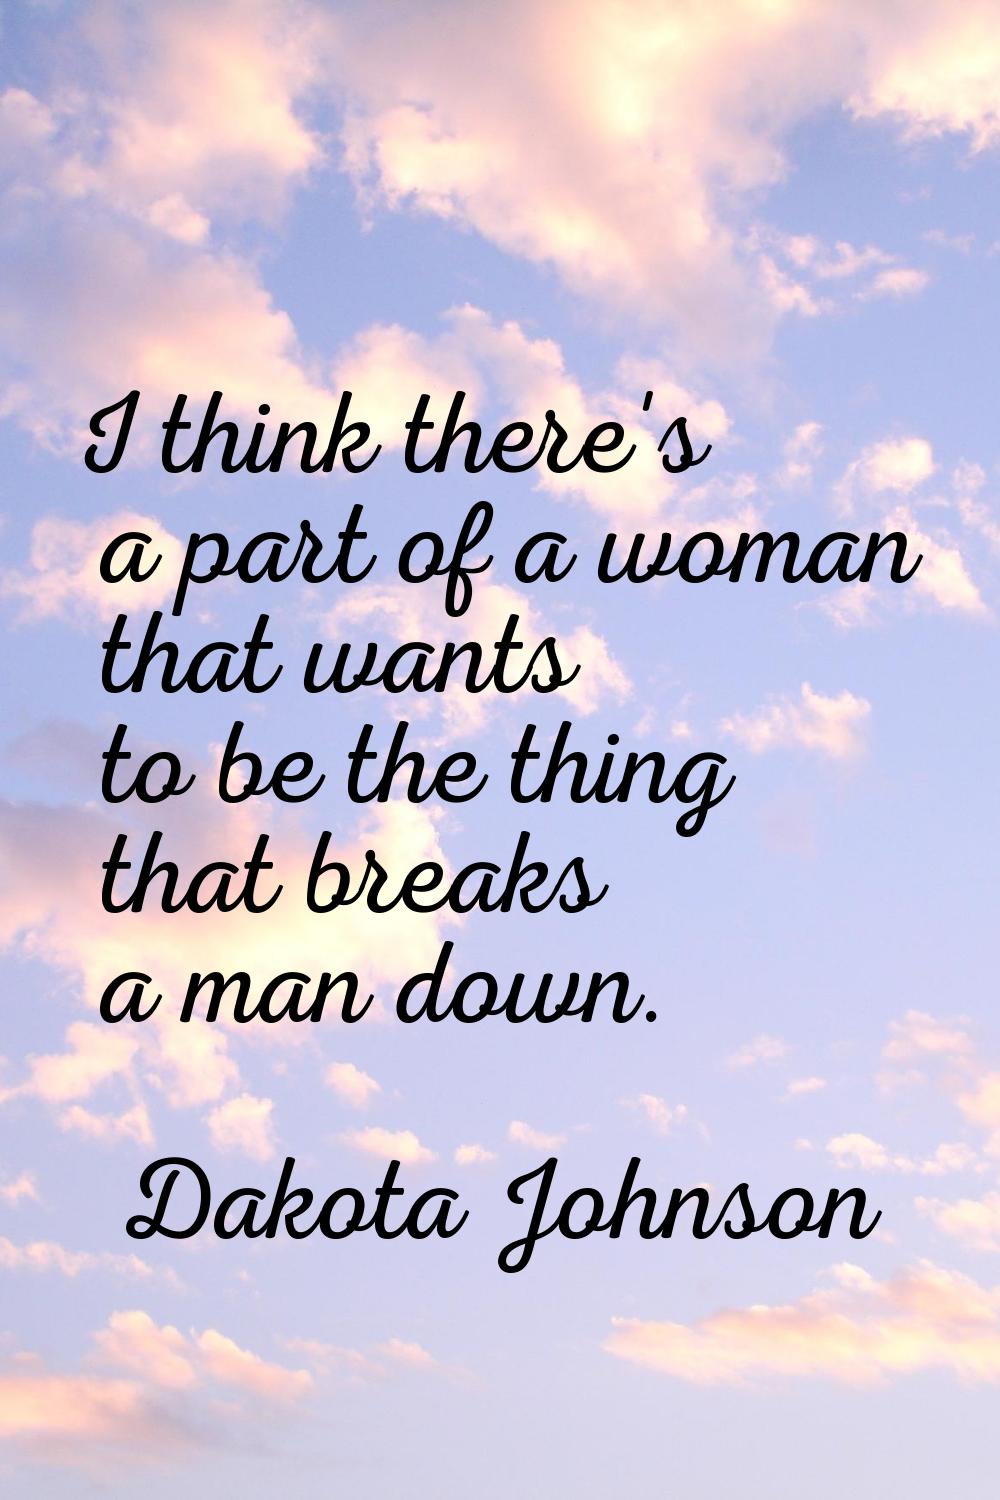 I think there's a part of a woman that wants to be the thing that breaks a man down.